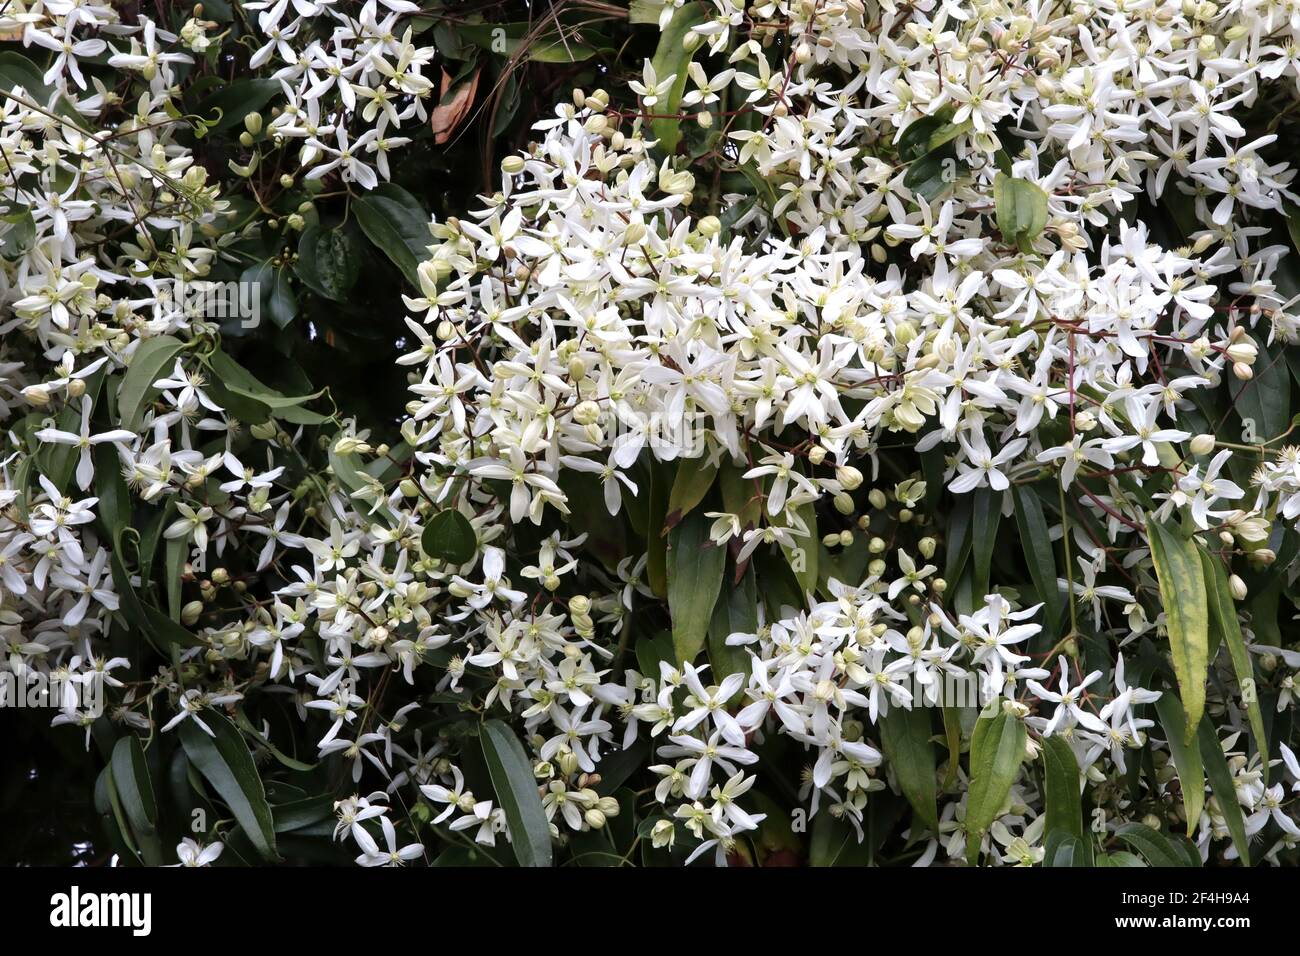 Clematis armandii ‘Snowdrift’ Armand clematis – climbing plant with clusters of large scented white star-shaped flowers,  March, England, UK Stock Photo